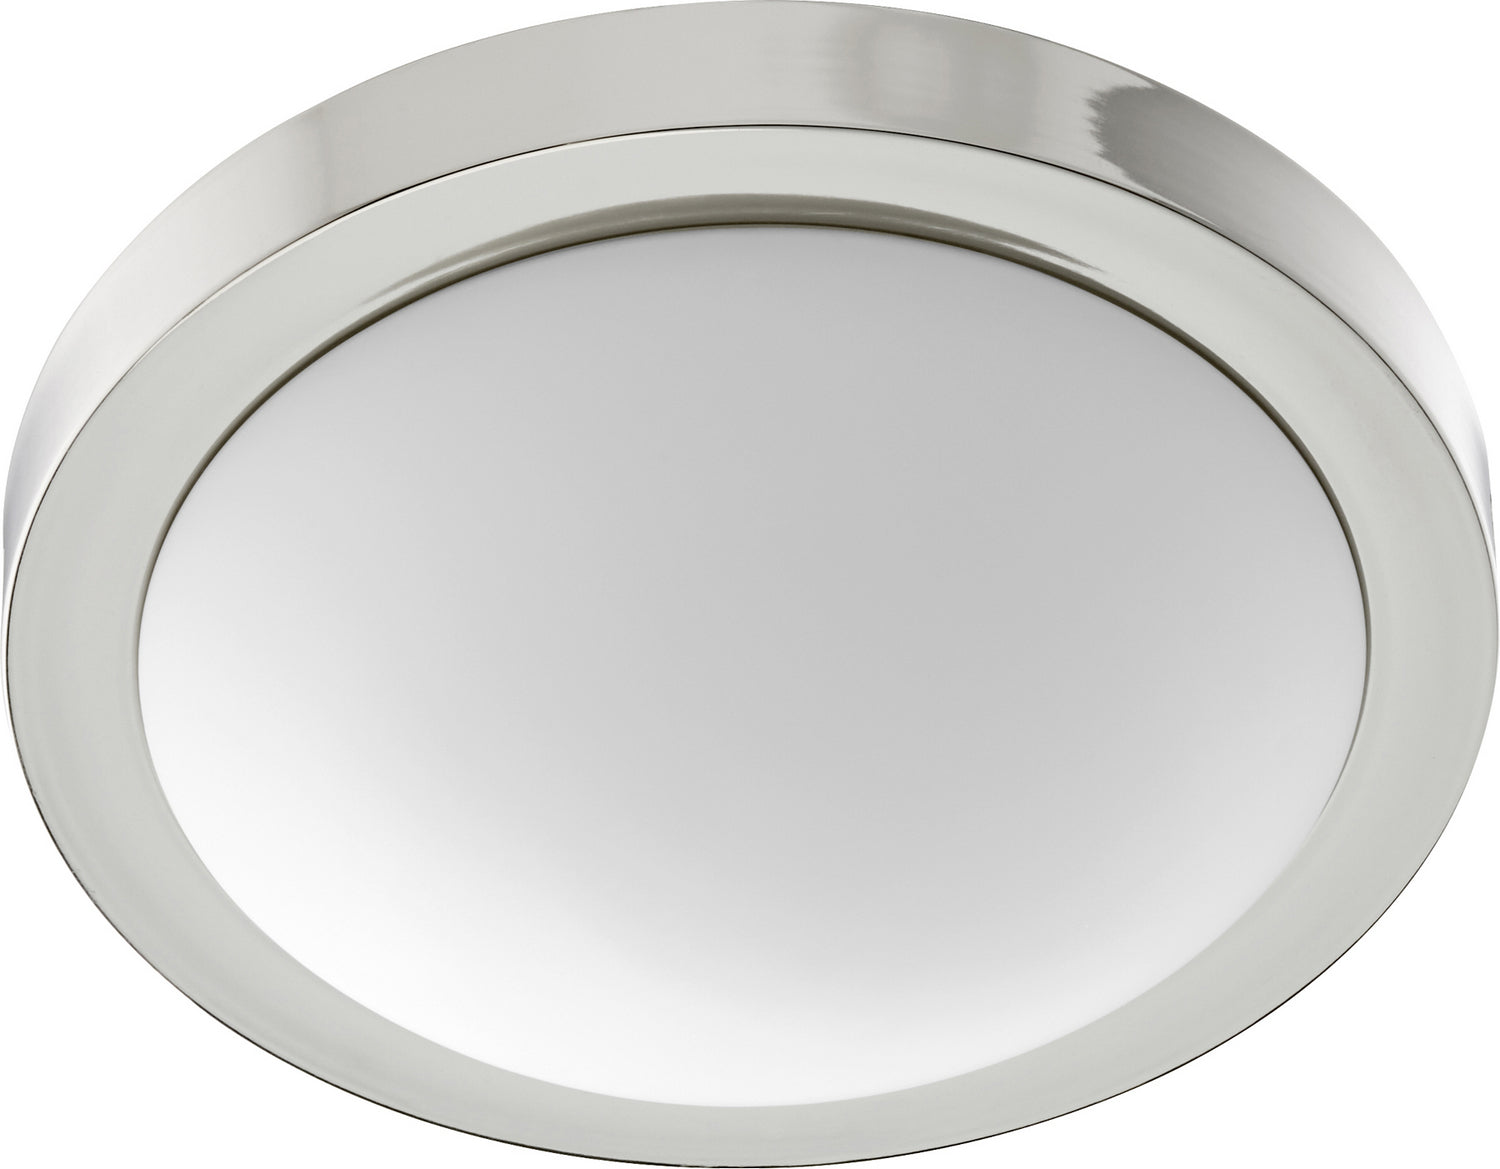 Quorum - 3505-13-62 - Two Light Ceiling Mount - 3505 Contempo Ceiling Mounts - Polished Nickel